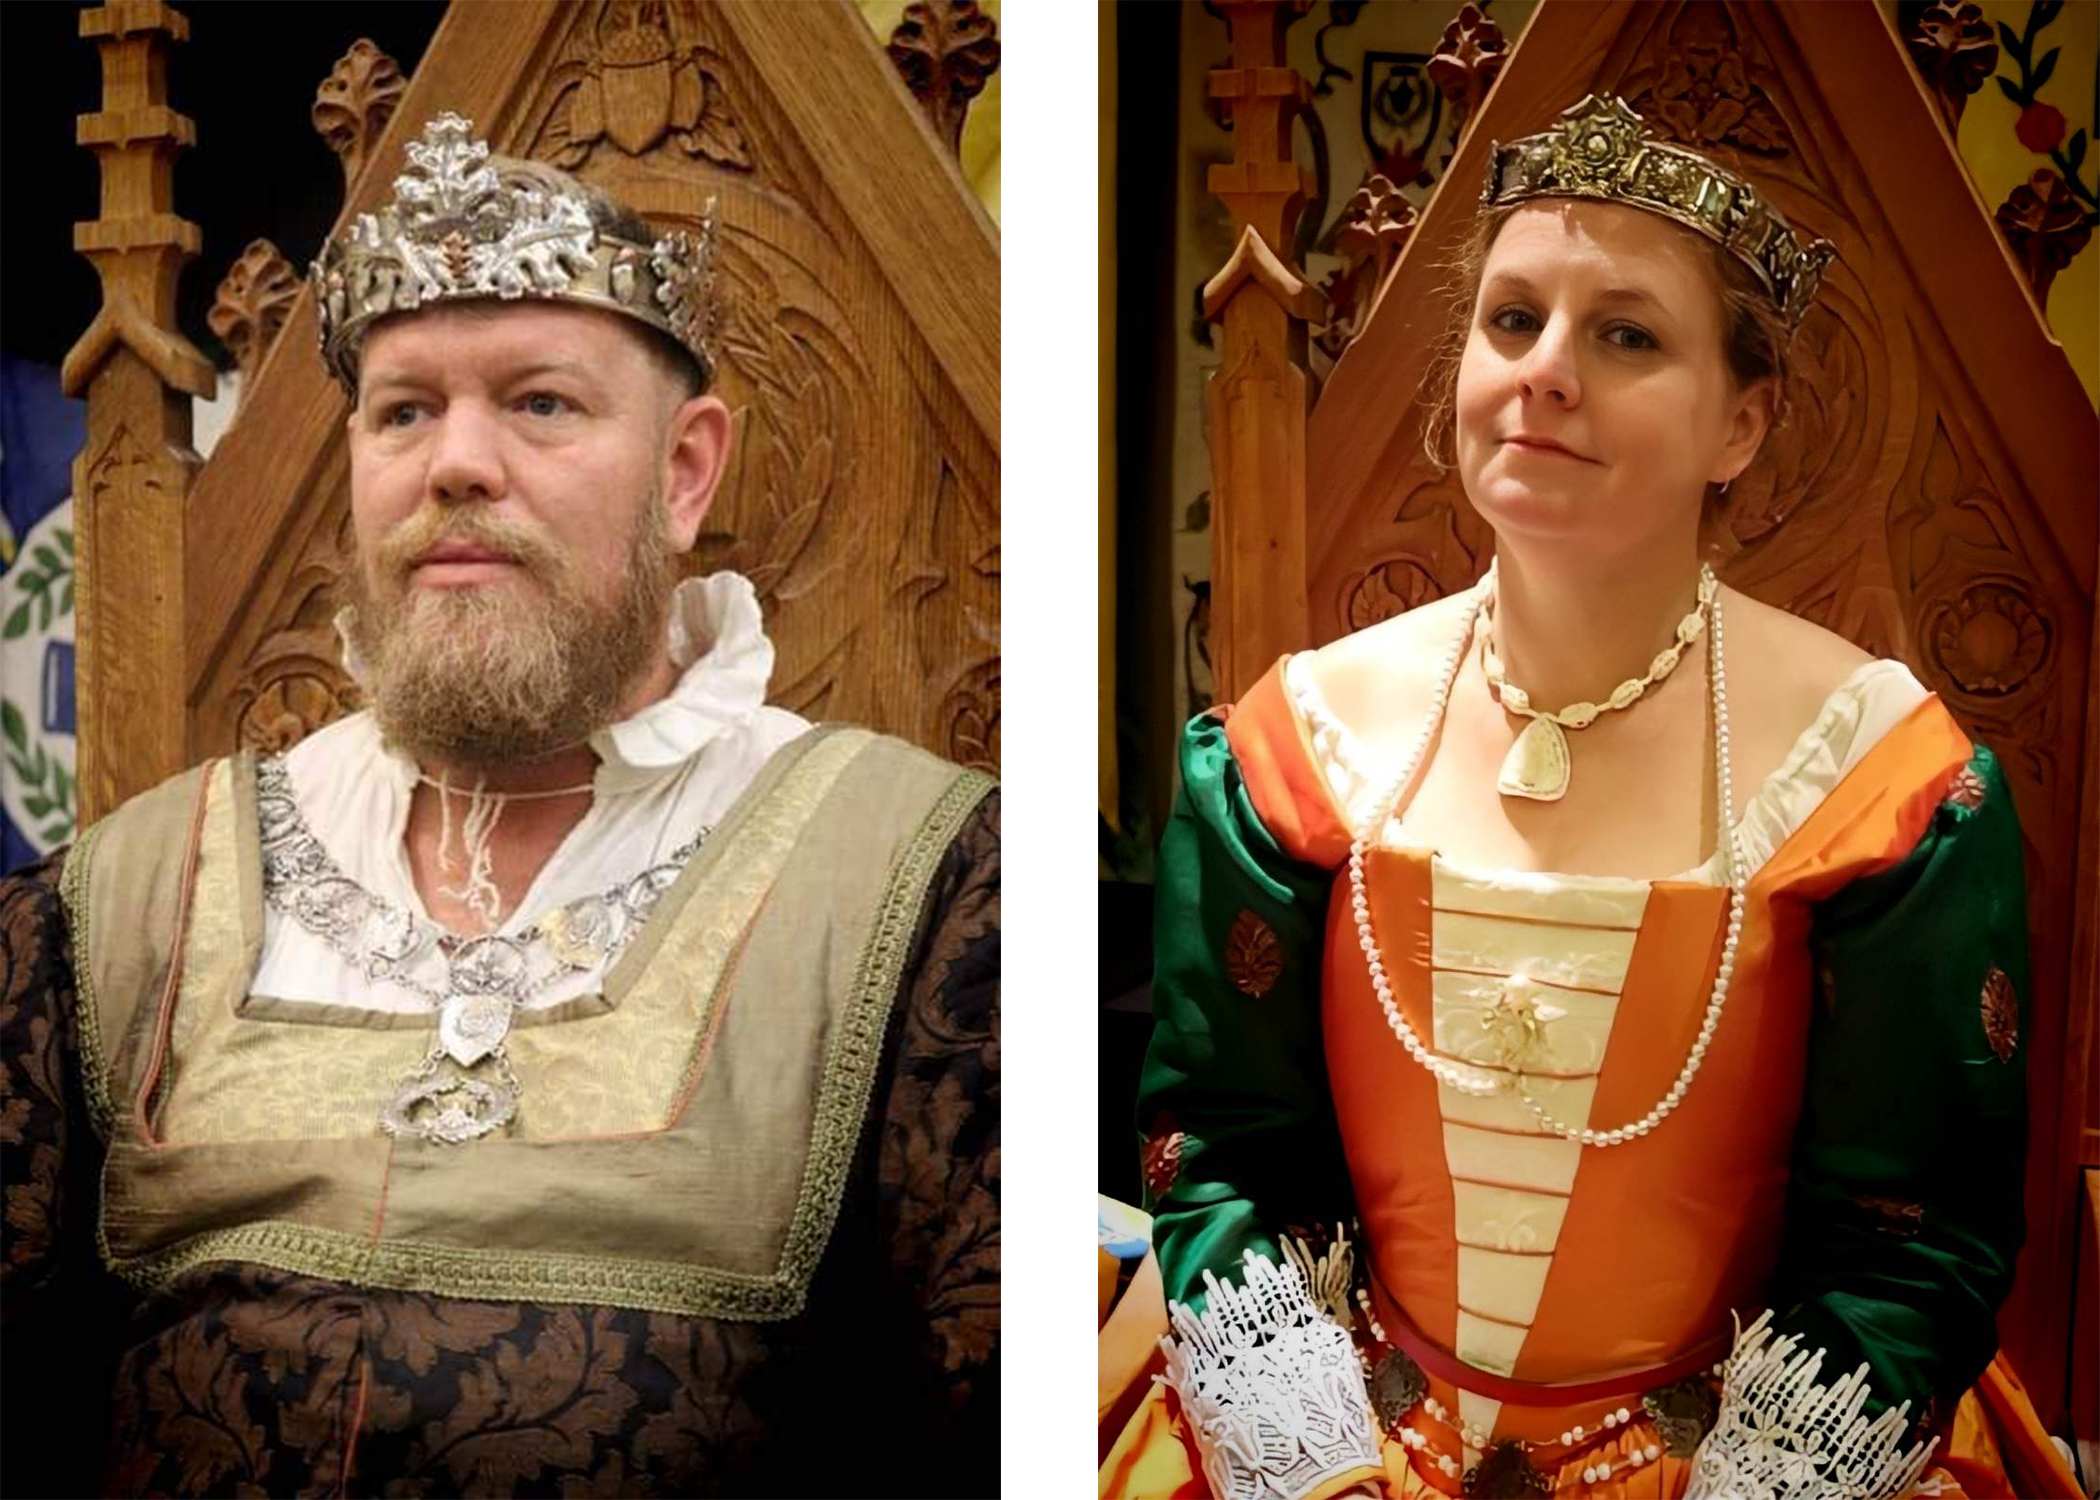 Kenric and Dagmar, King and Queen of the West